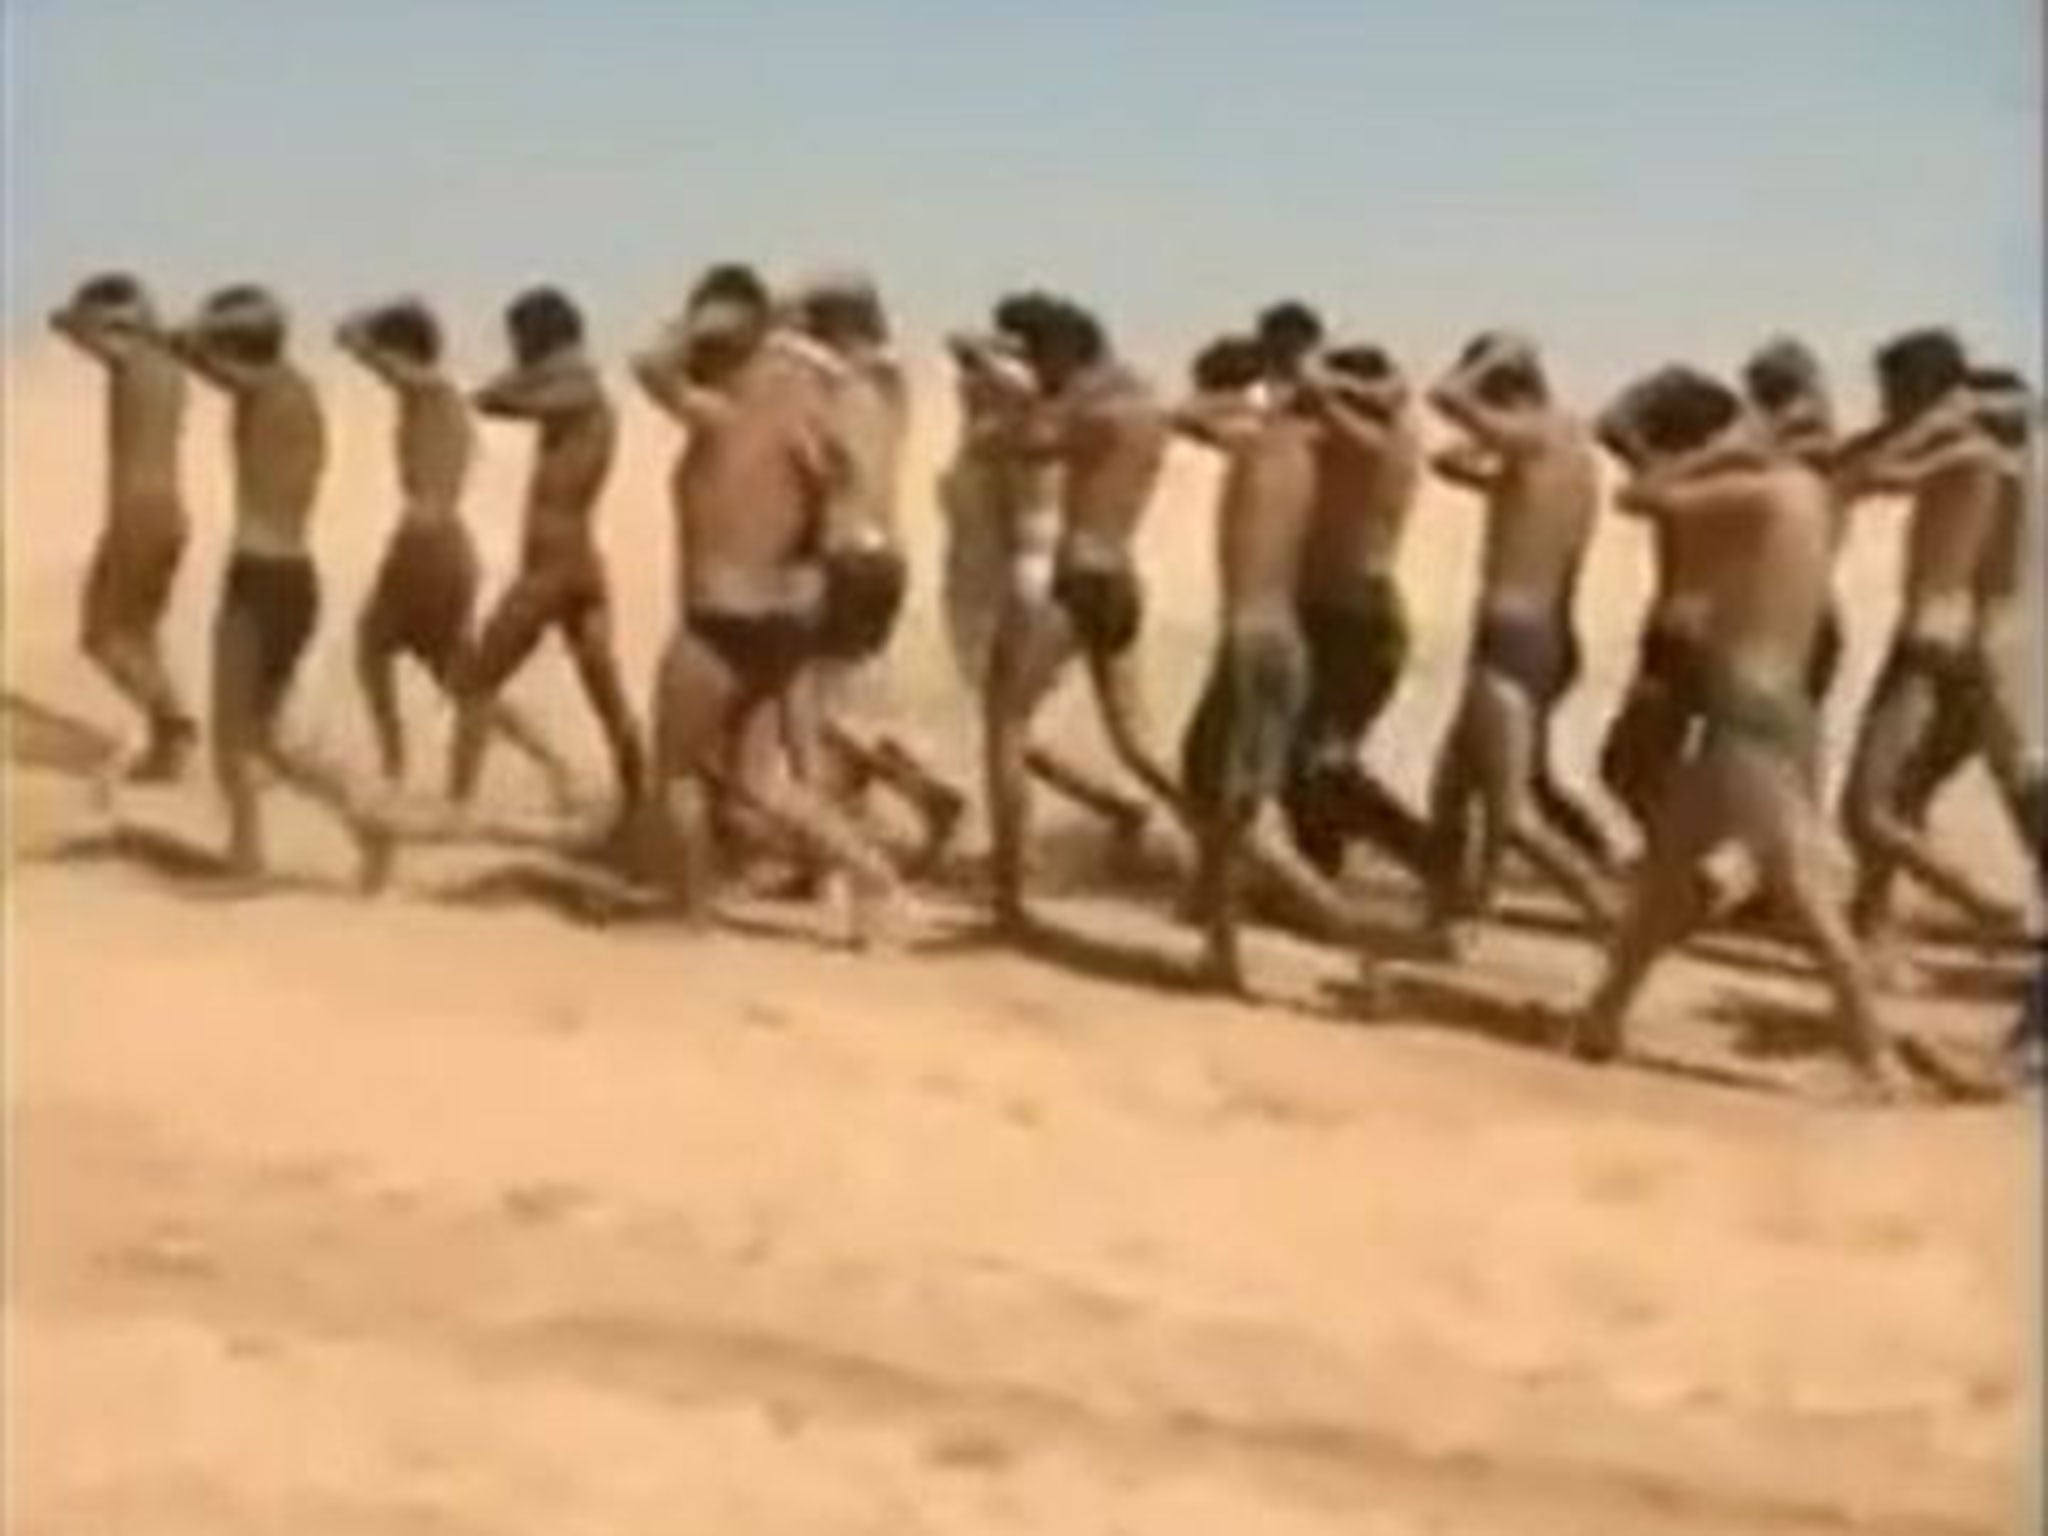 Young men in underwear being marched barefoot along a desert road before being allegedly executed by Isis